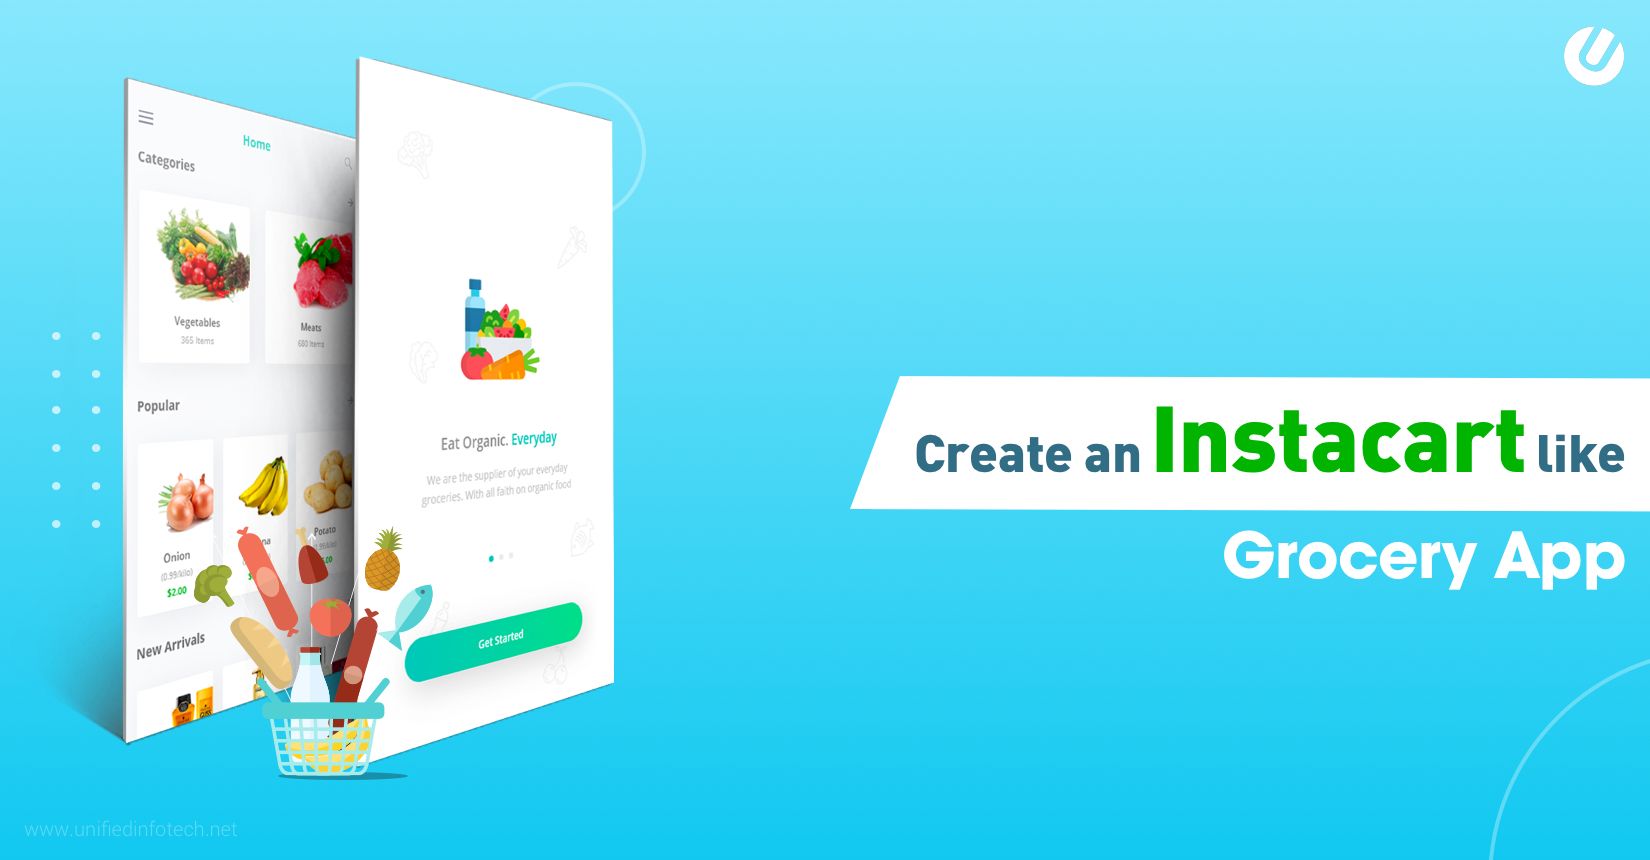 7 Step Guide To Build A Grocery App Like Instacart/Grofers